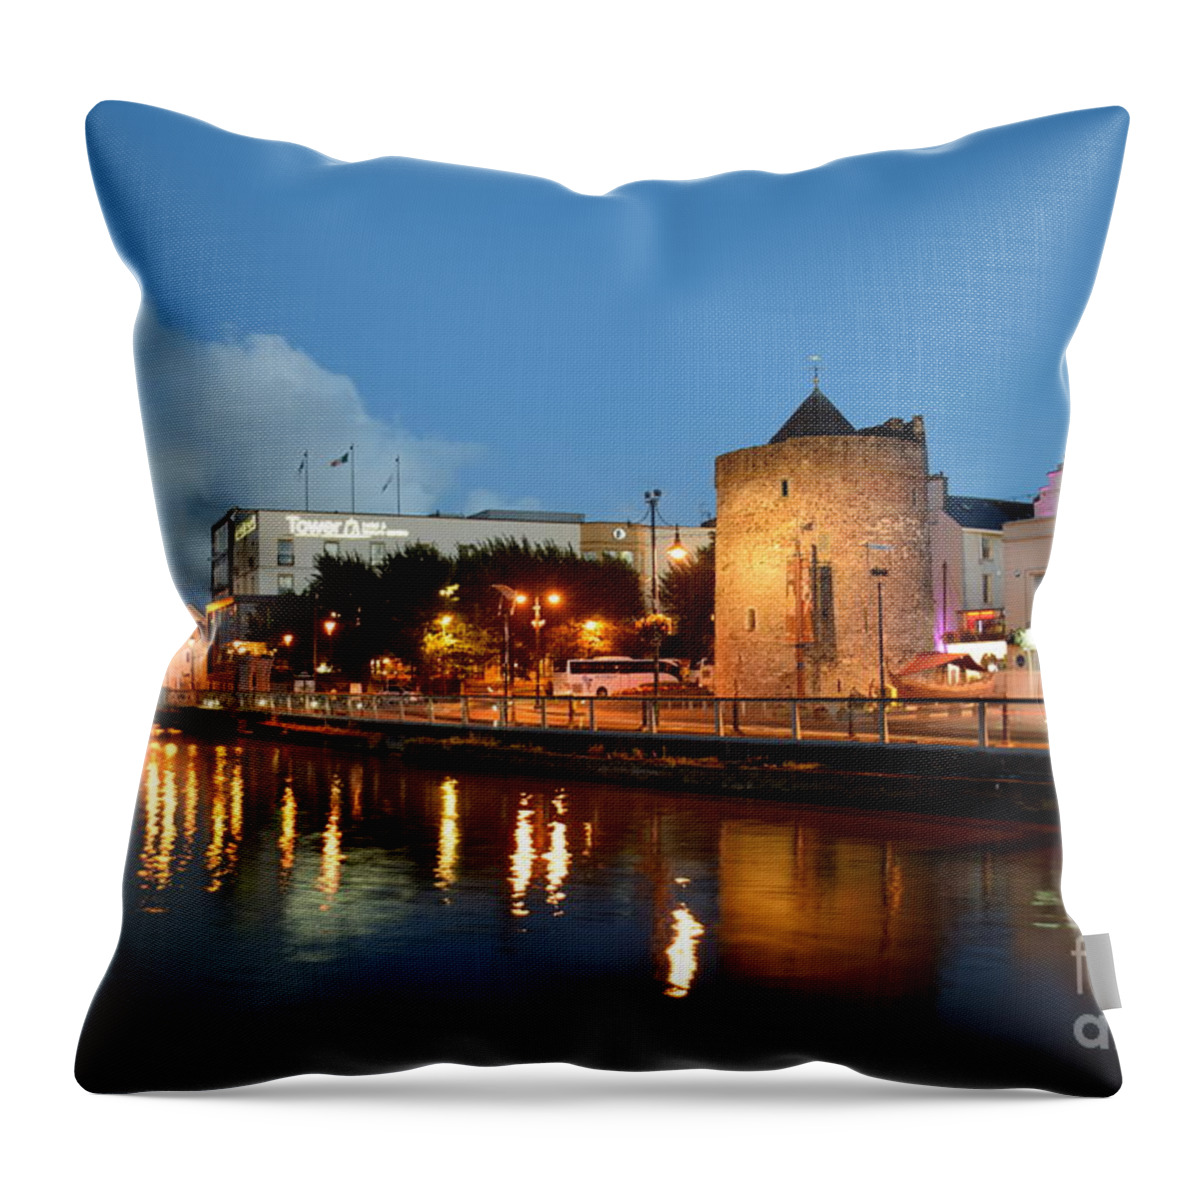 River Suir Throw Pillow featuring the photograph Waterford City Reflections by Joe Cashin